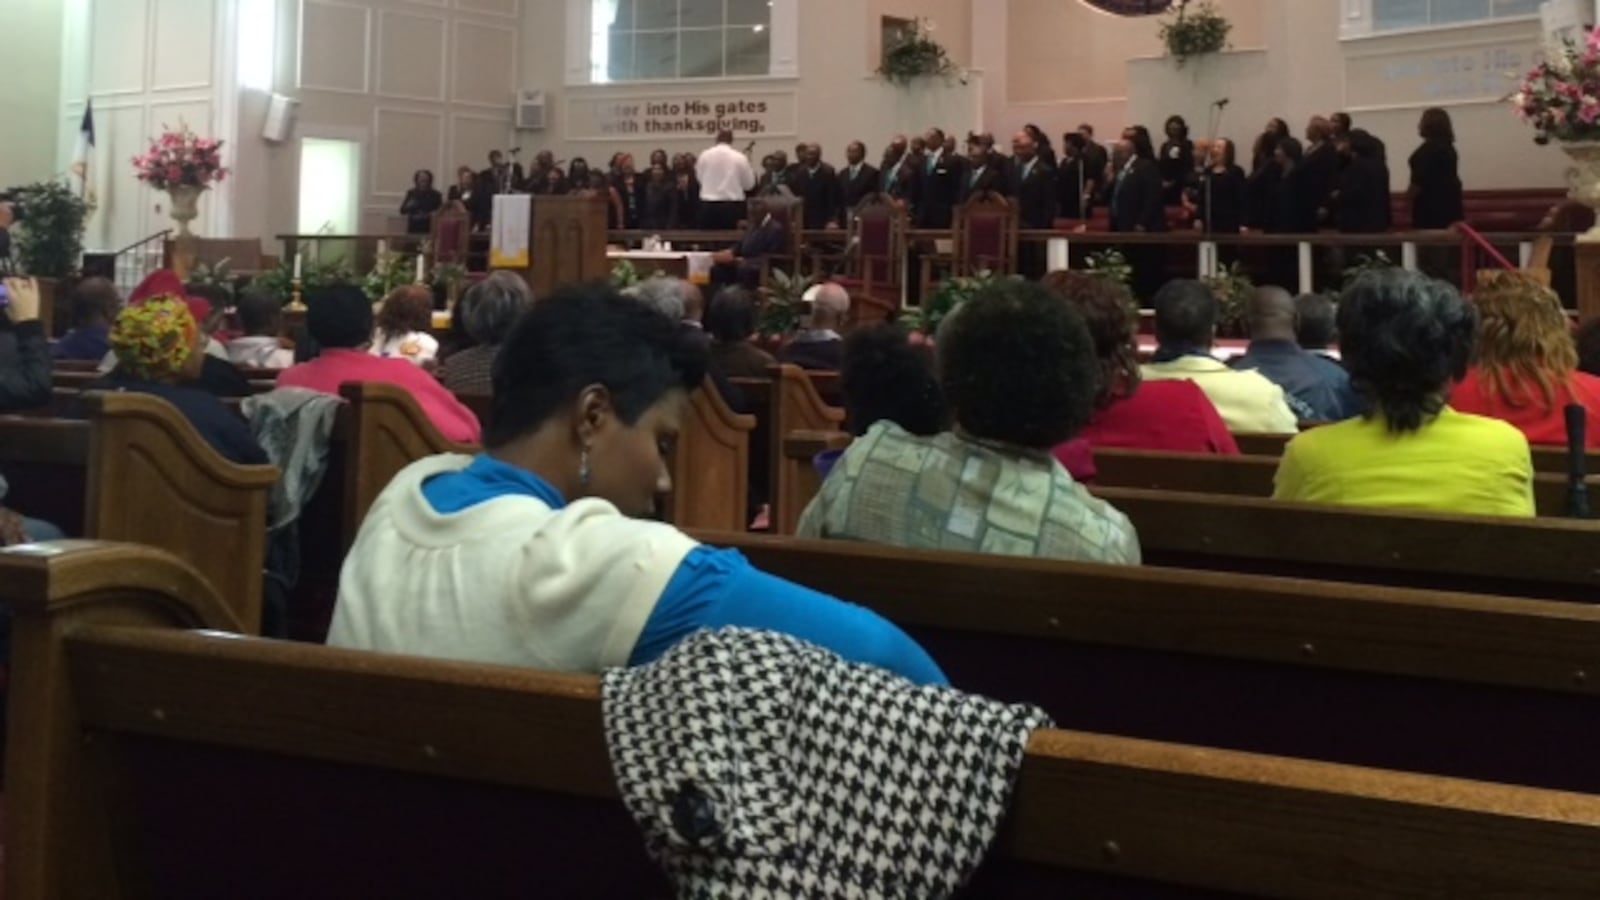 A choir performs during a rally for school vouchers Tuesday at Mt. Moriah Baptist Church.